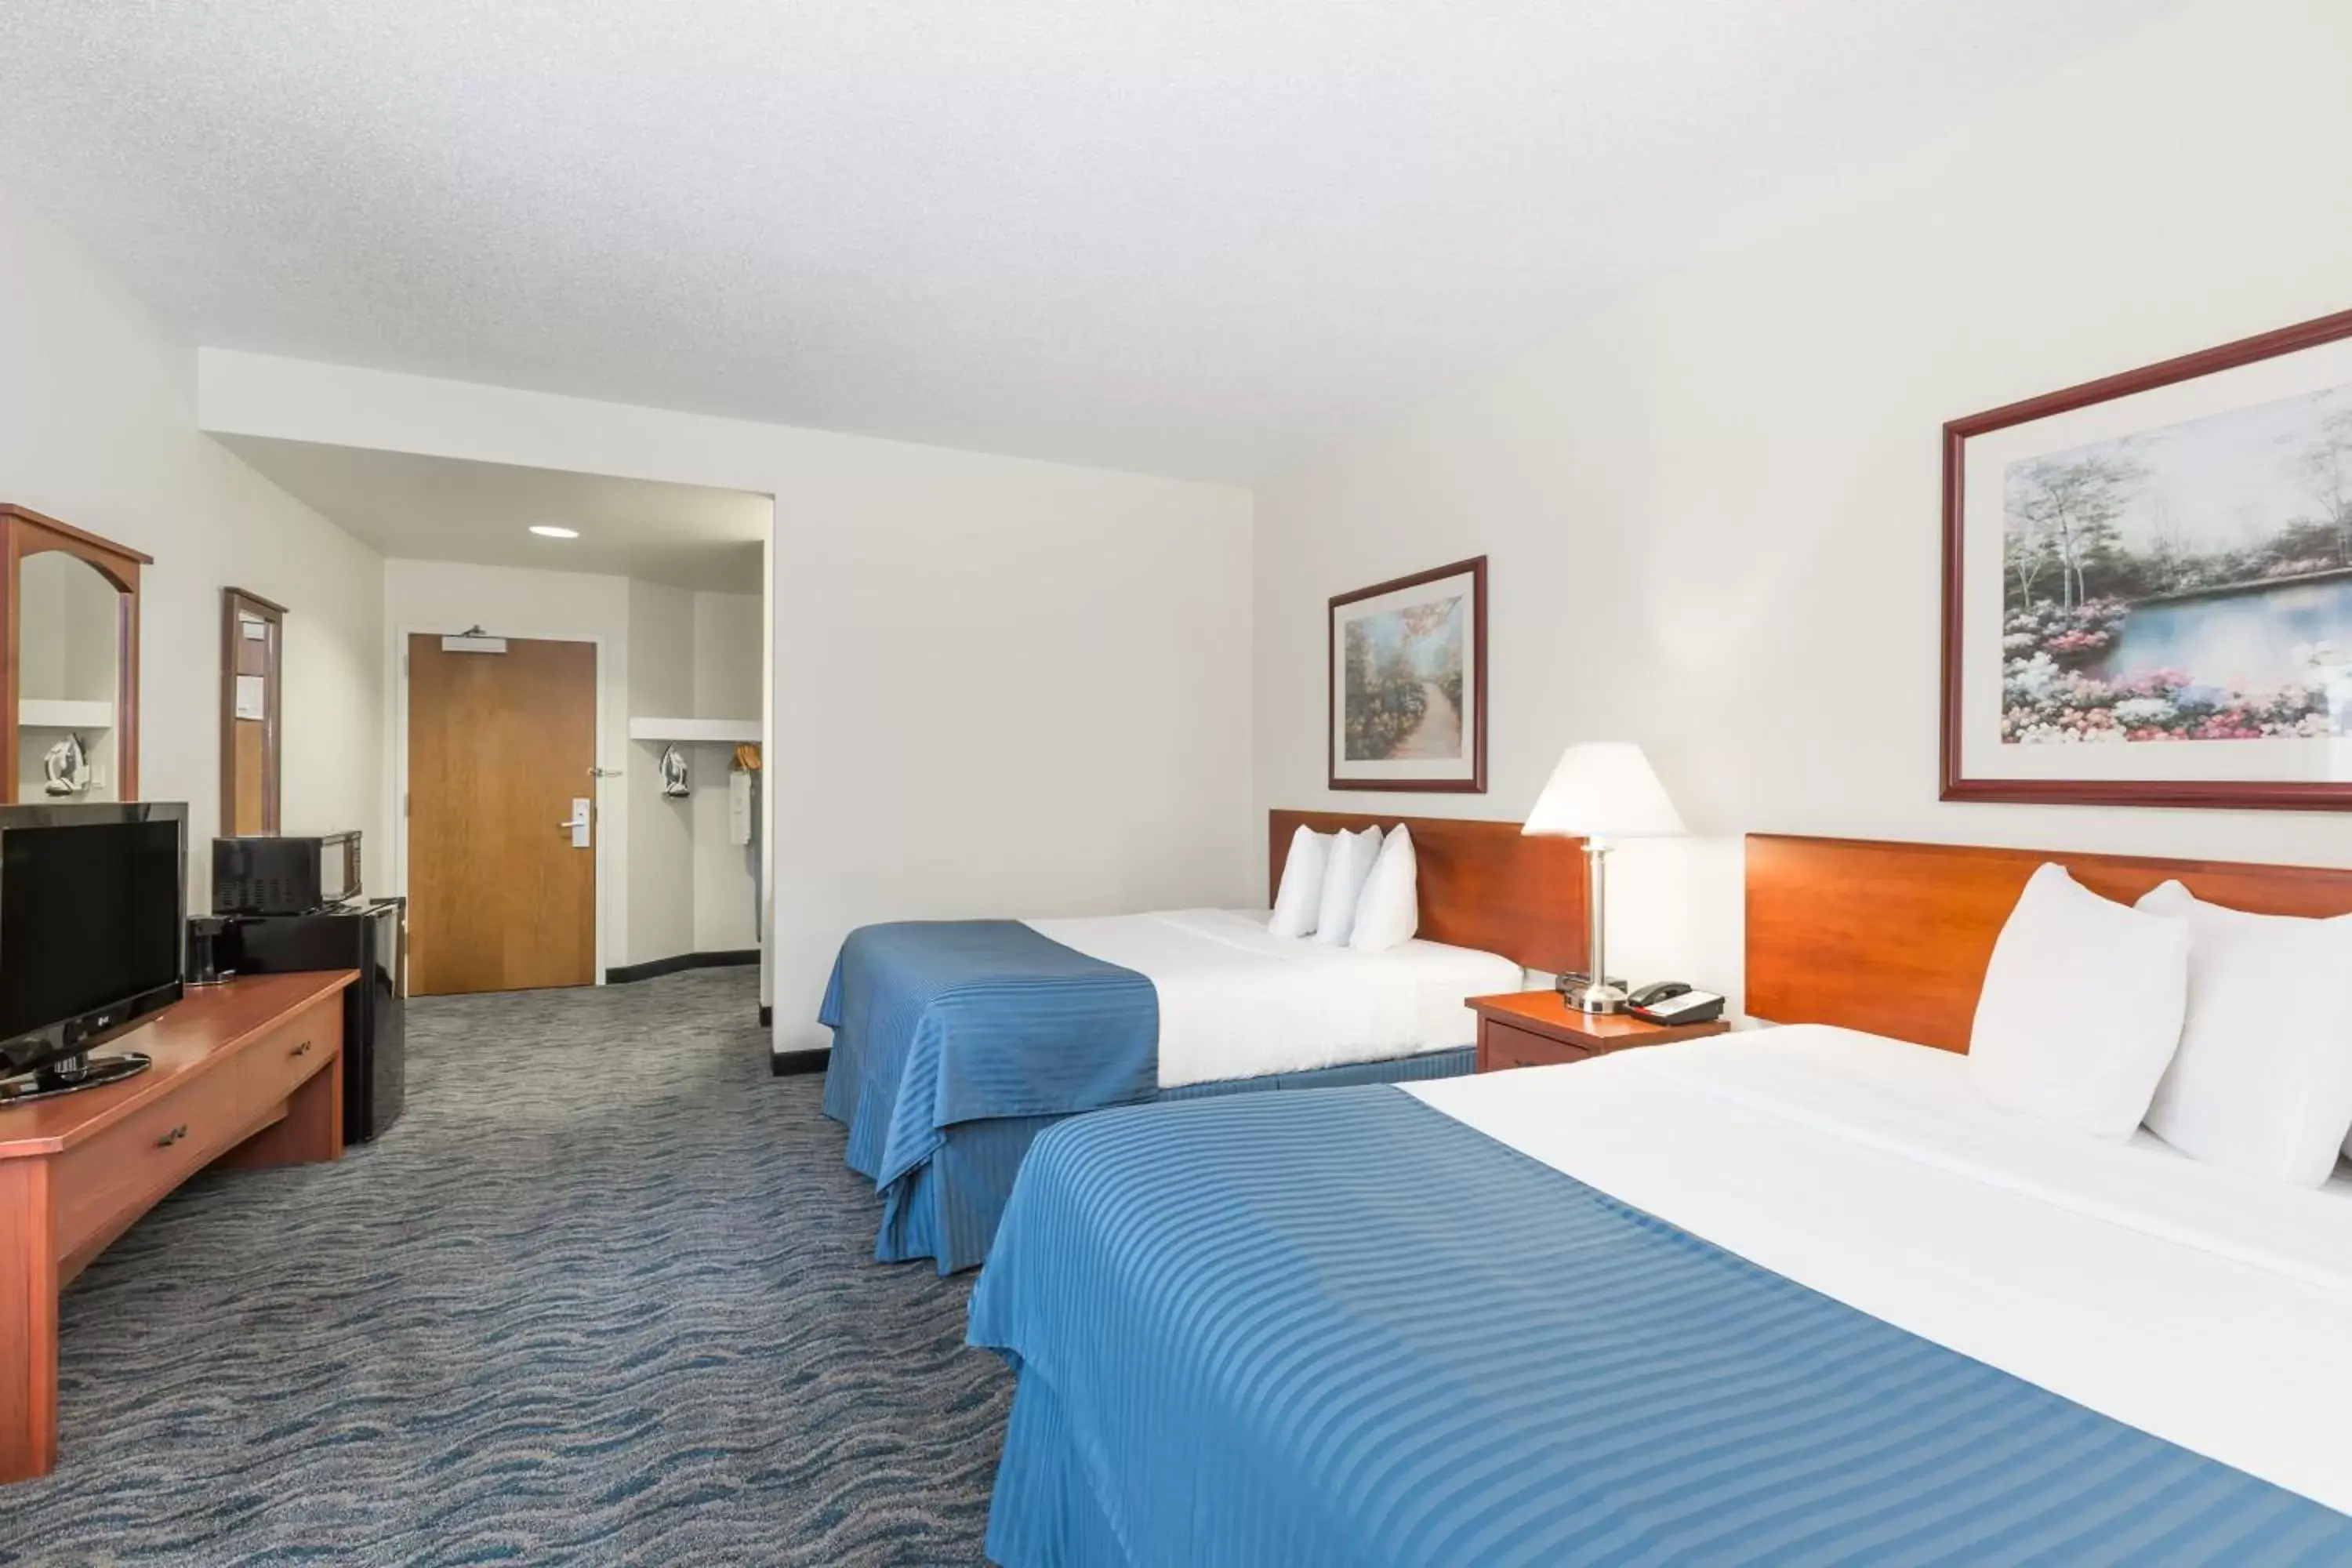 TV and multimedia, Room Photo in Baymont by Wyndham Des Moines Airport